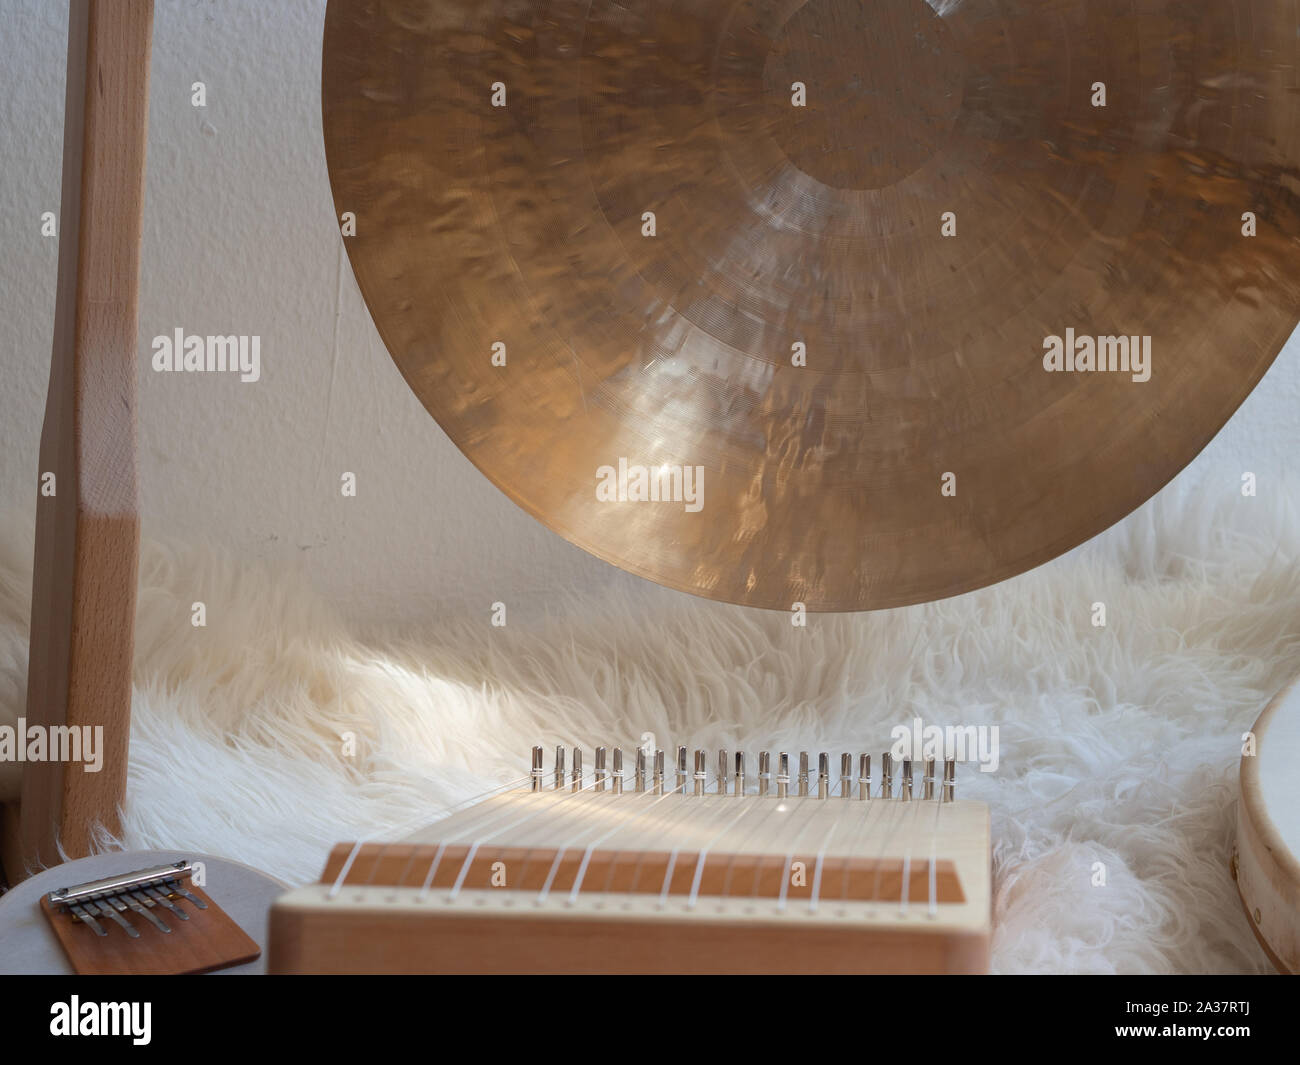 Sound healing set up with gong and monochord Stock Photo